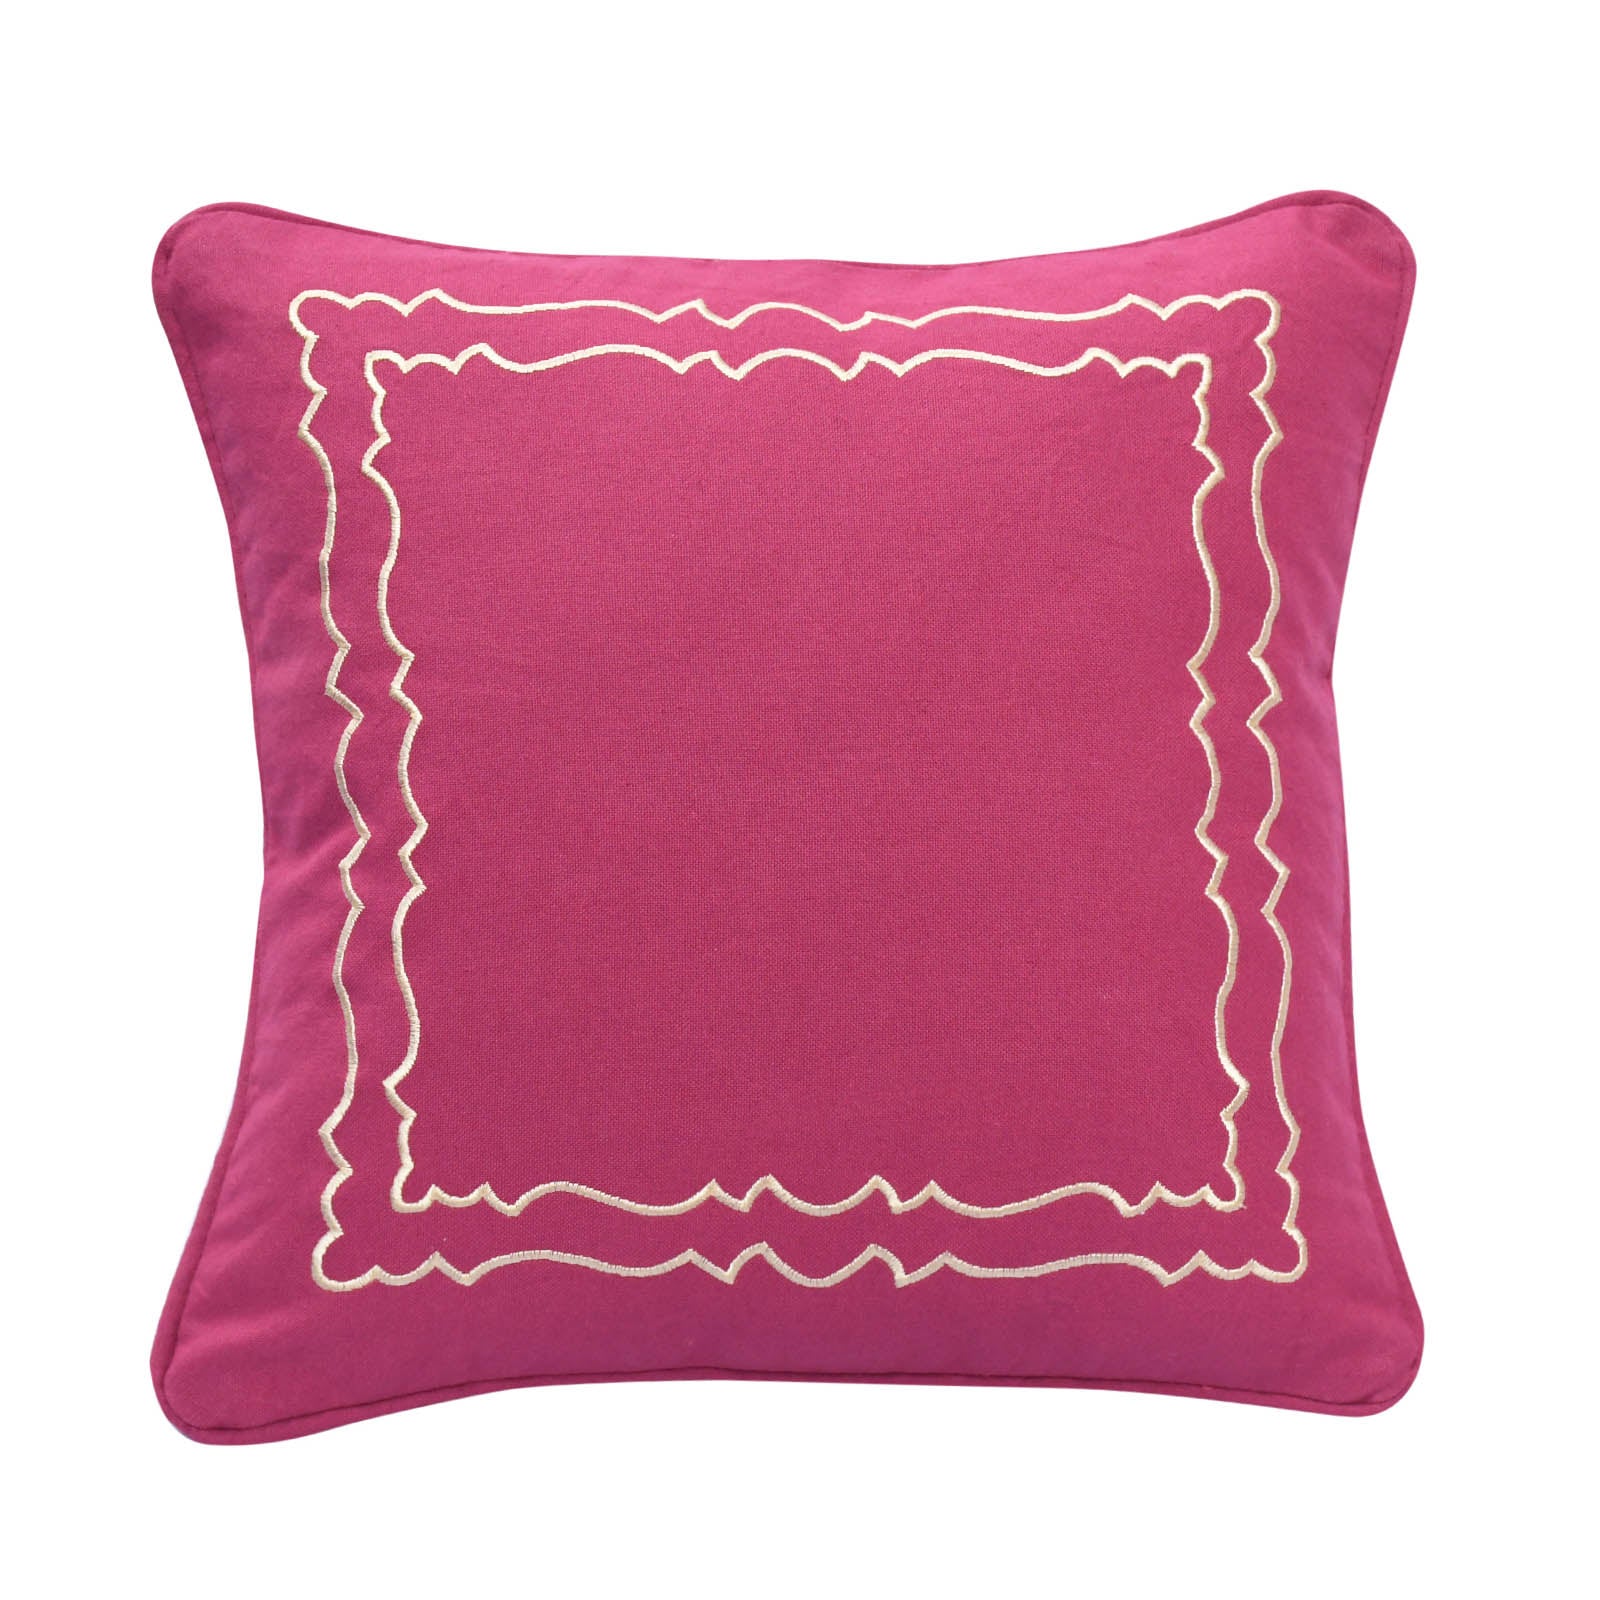 Scalloped Cushion Cover - Vintage Scalloped Magenta